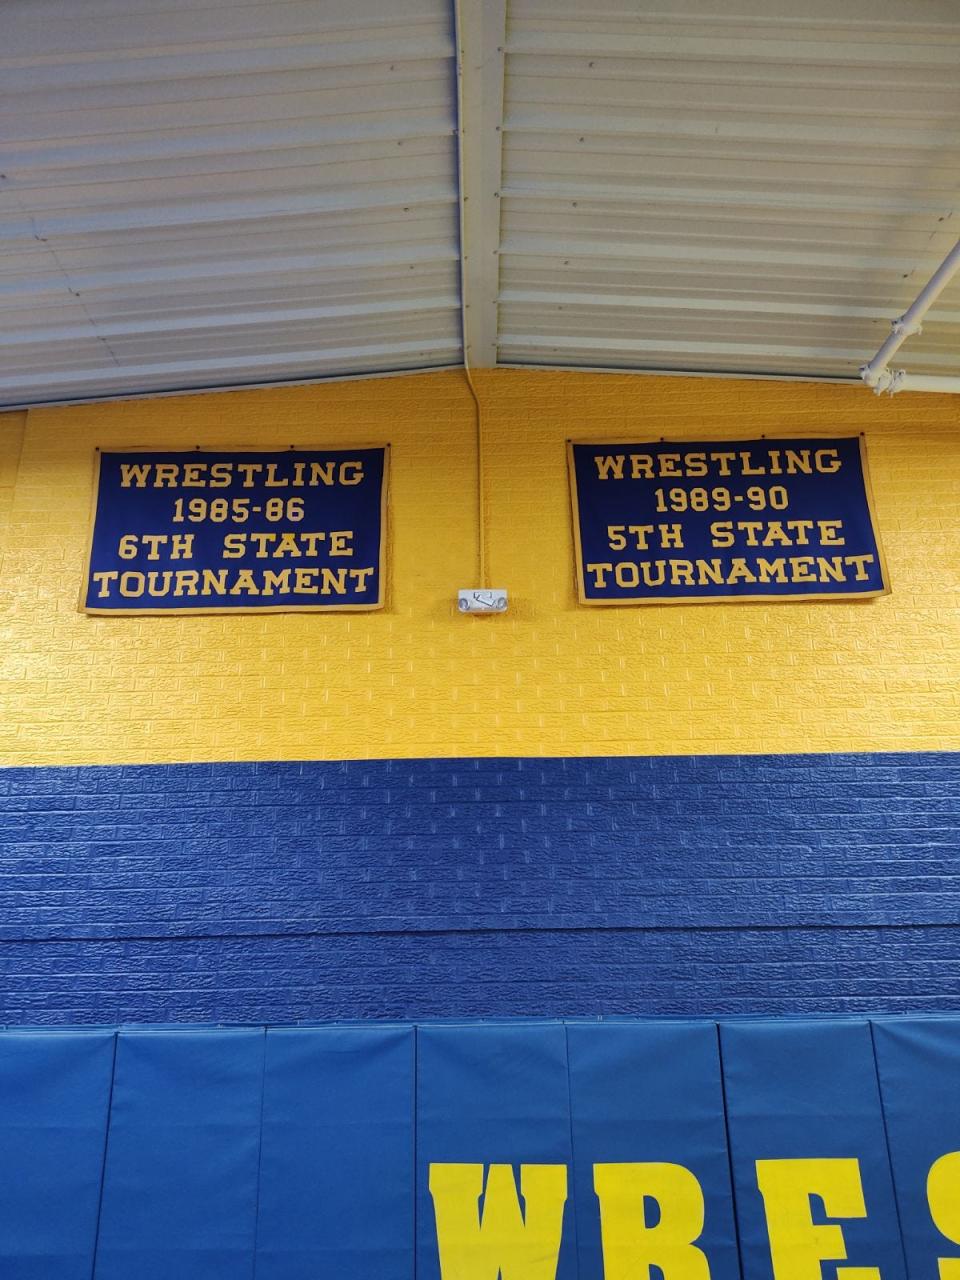 Ontario hopes to add a third banner to the wrestling room wall, commemorating a top 10 finish in the state meet. Submitted